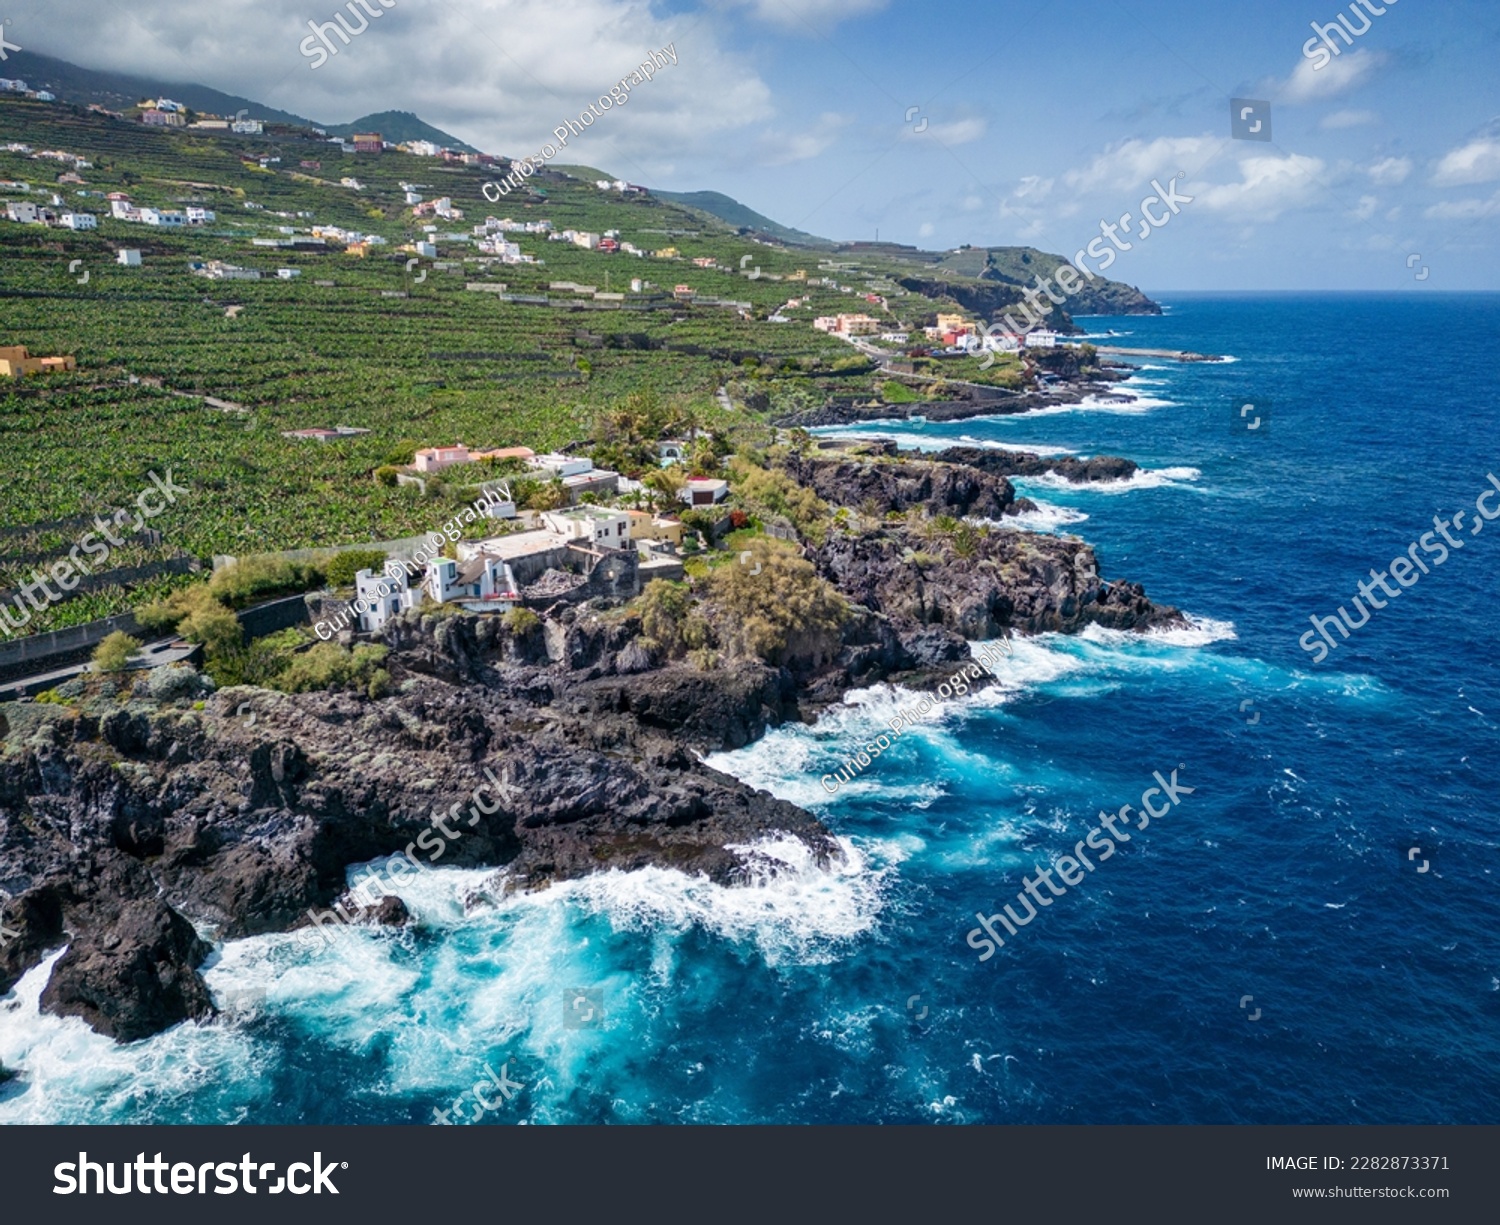 Aerial View at San Andres village near Los Sauces at northeast of La Palma Island. Green Volcanic Hills, and the Coast of the Atlantic Ocean. Canary Islands, Spain.  #2282873371